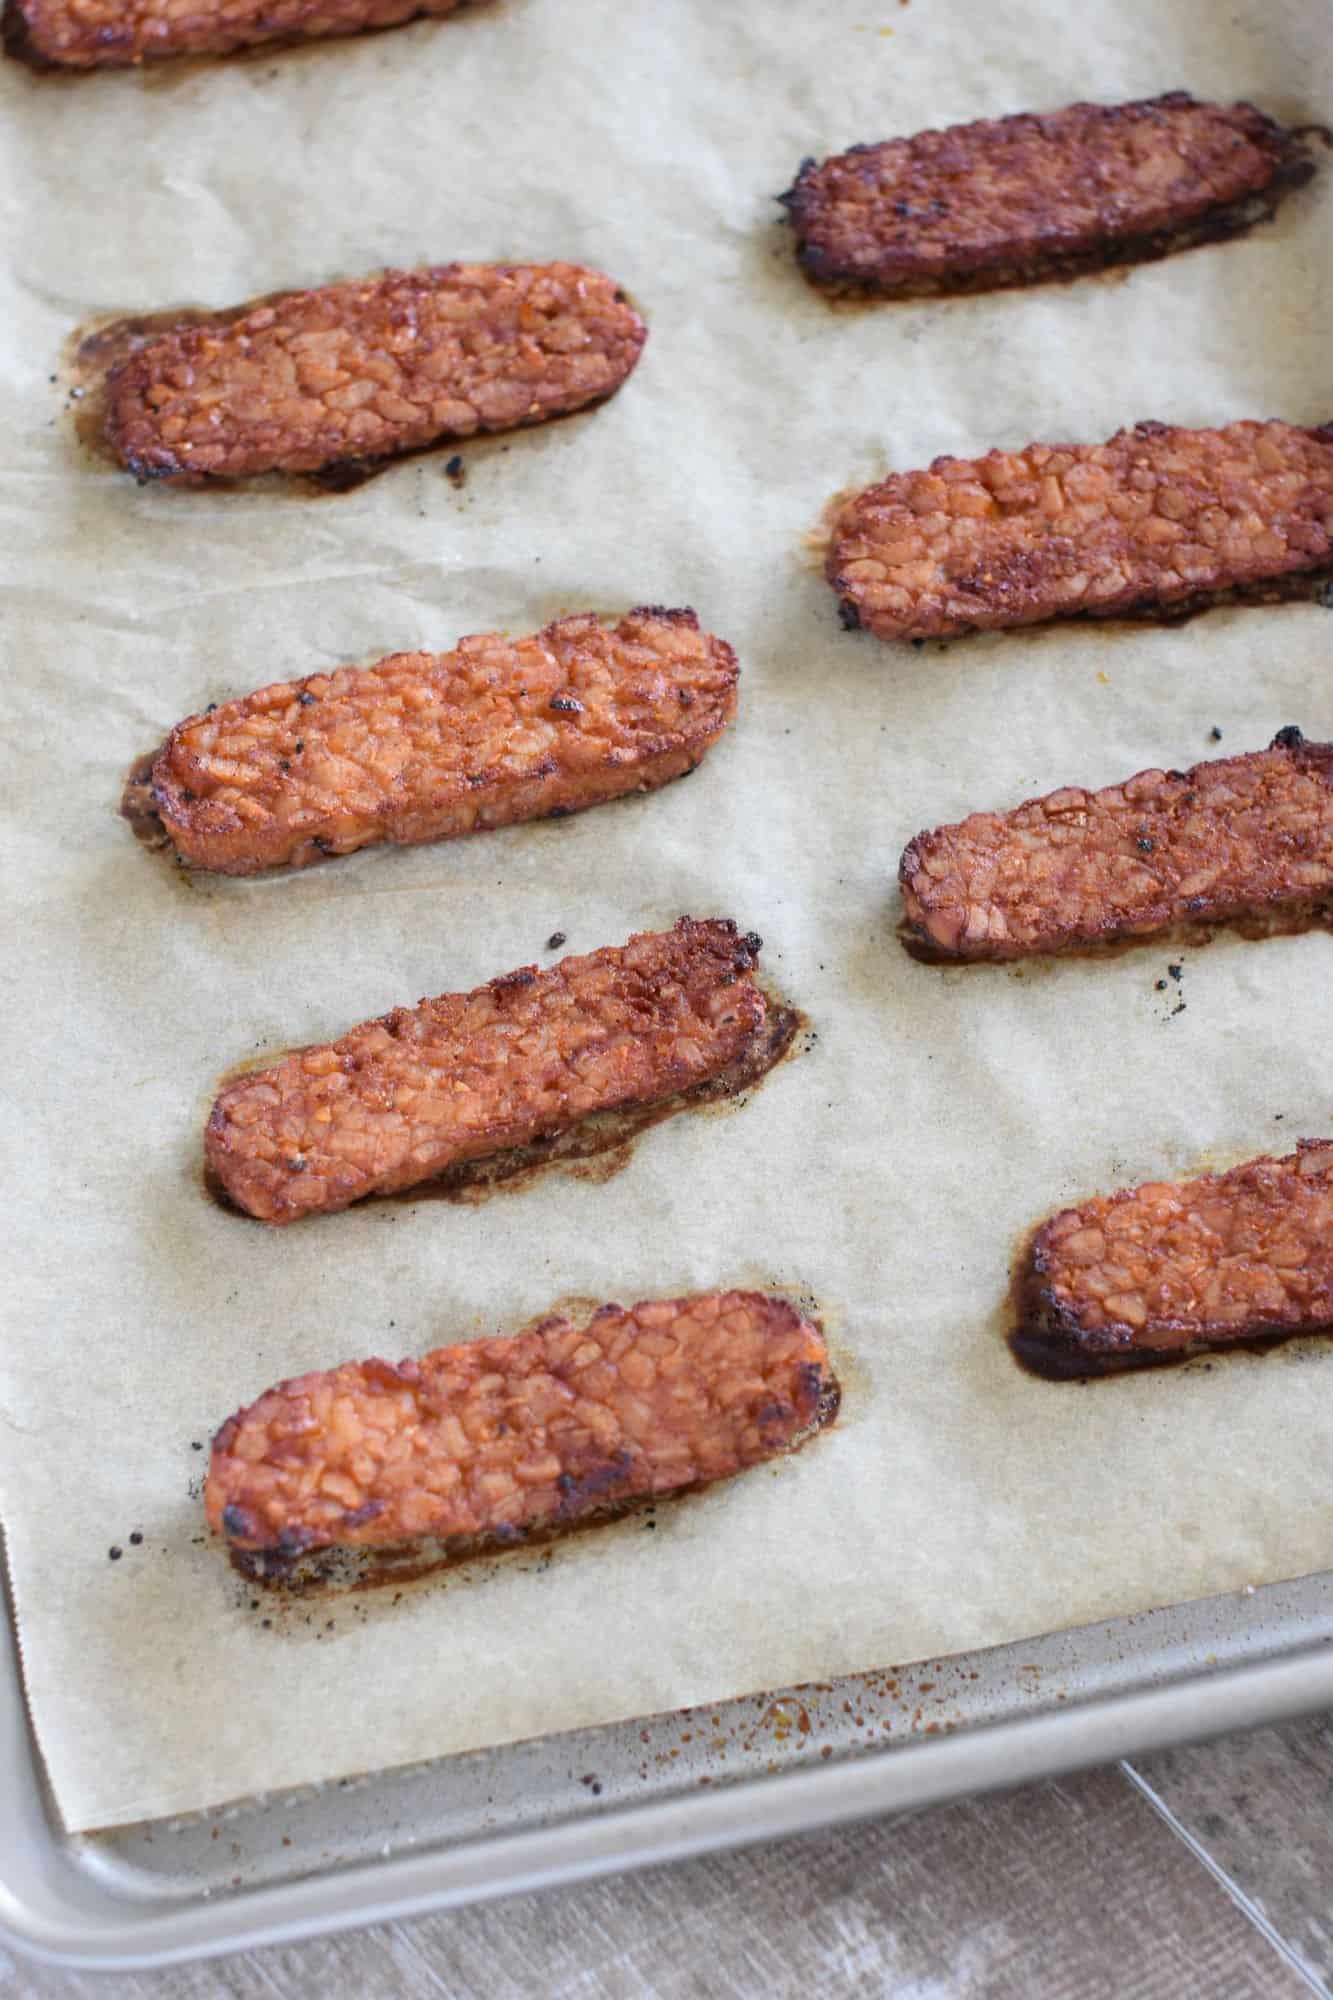 tempeh strips on baking sheet after being cooked